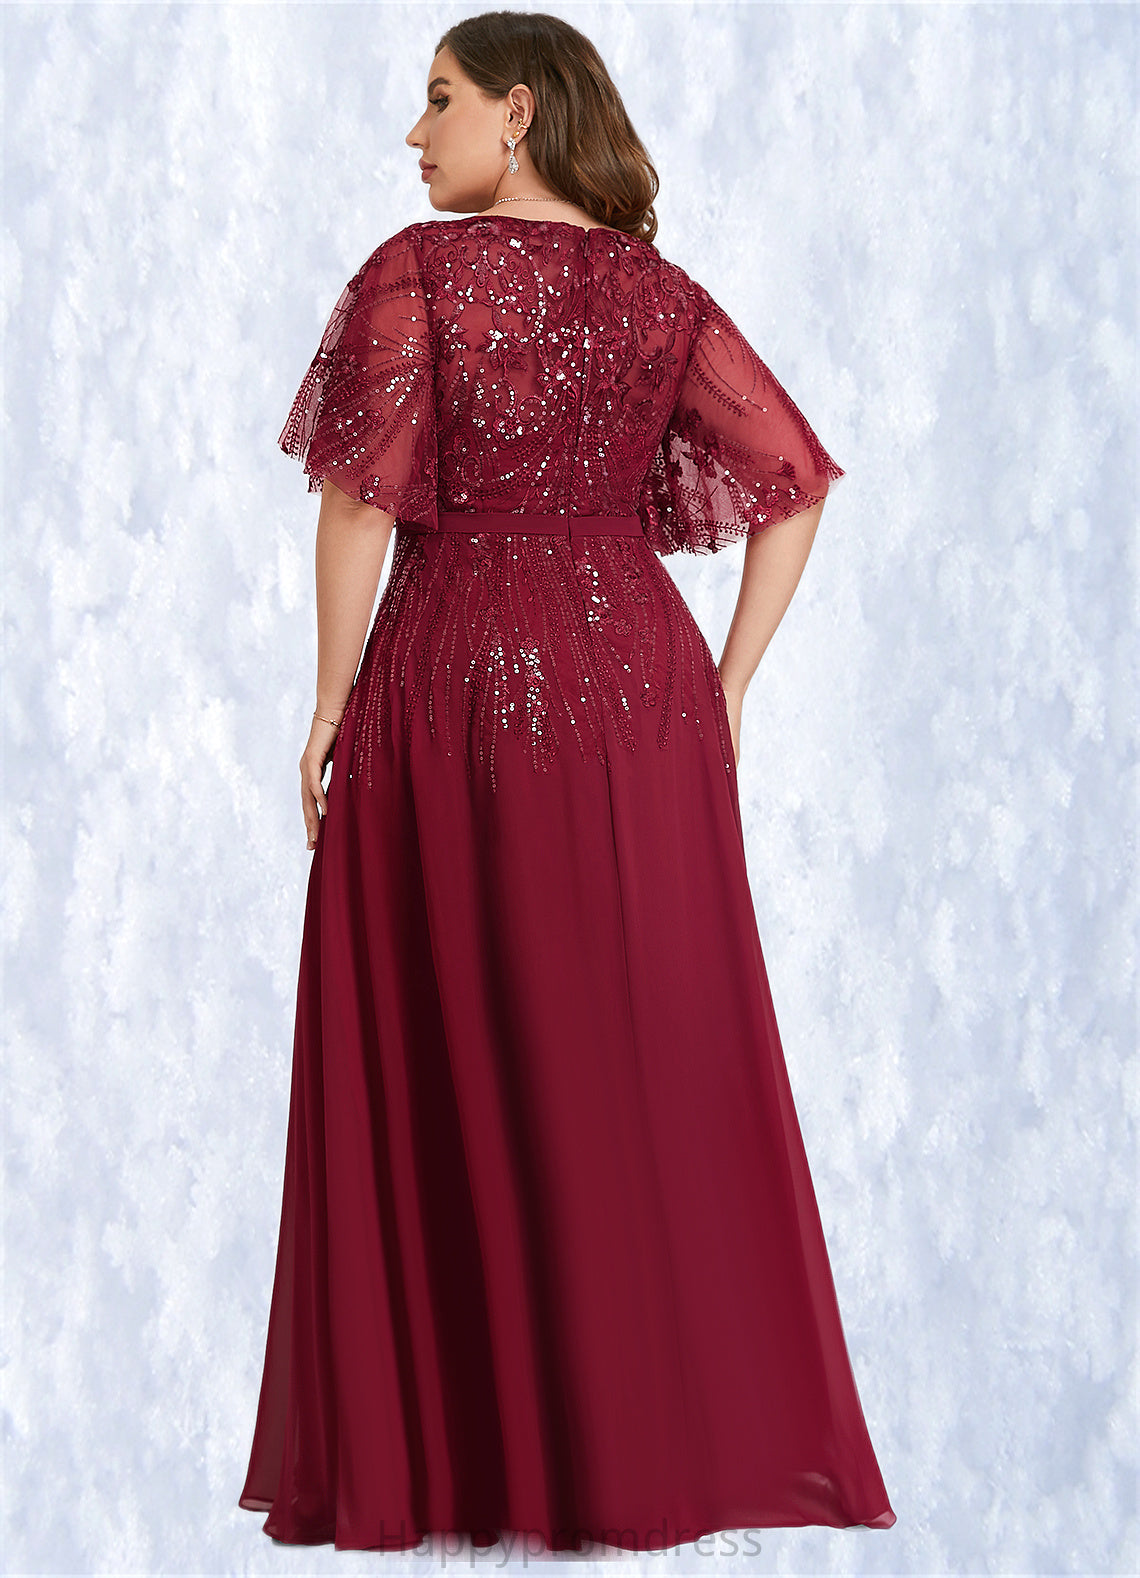 June A-line V-Neck Floor-Length Chiffon Lace Mother of the Bride Dress With Sequins XXSP0021767